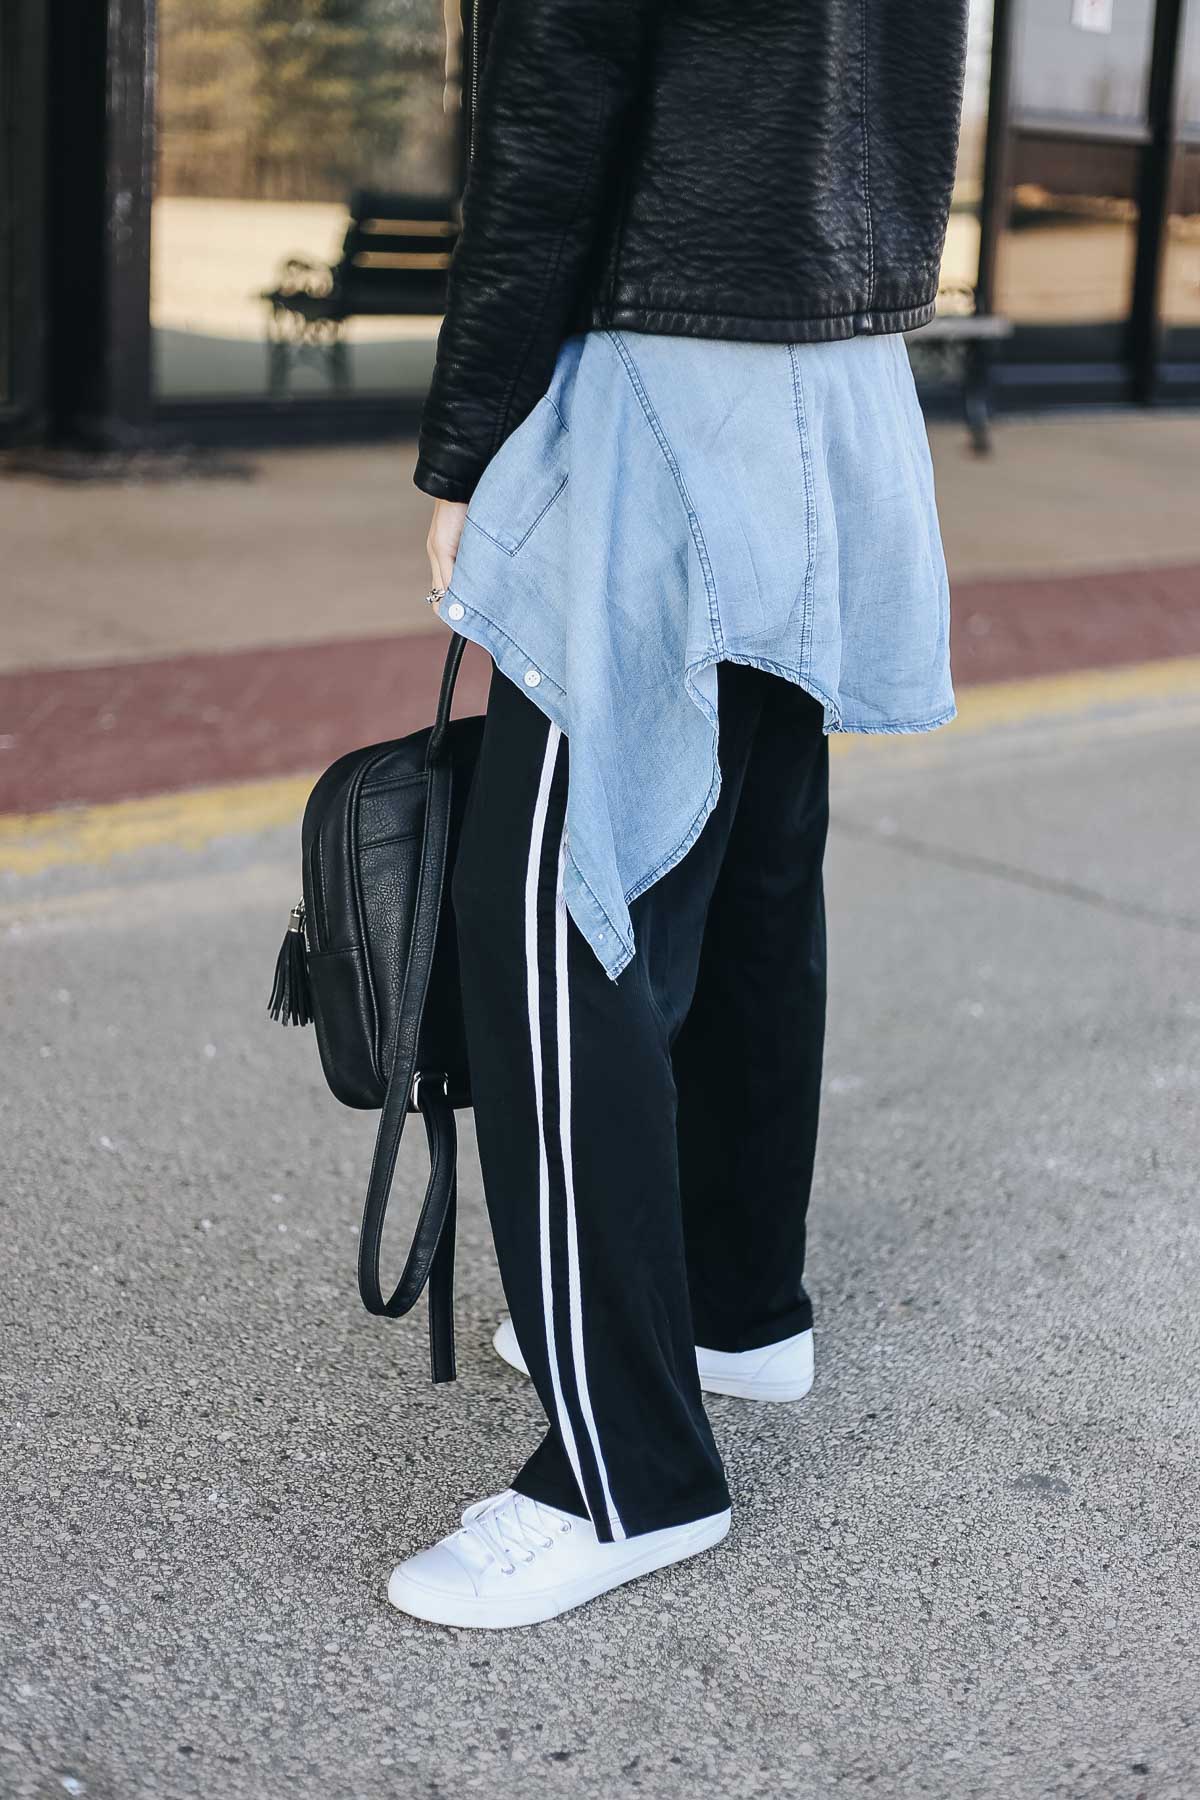 comfy airport outfit with track pants and a motorcycle jacket